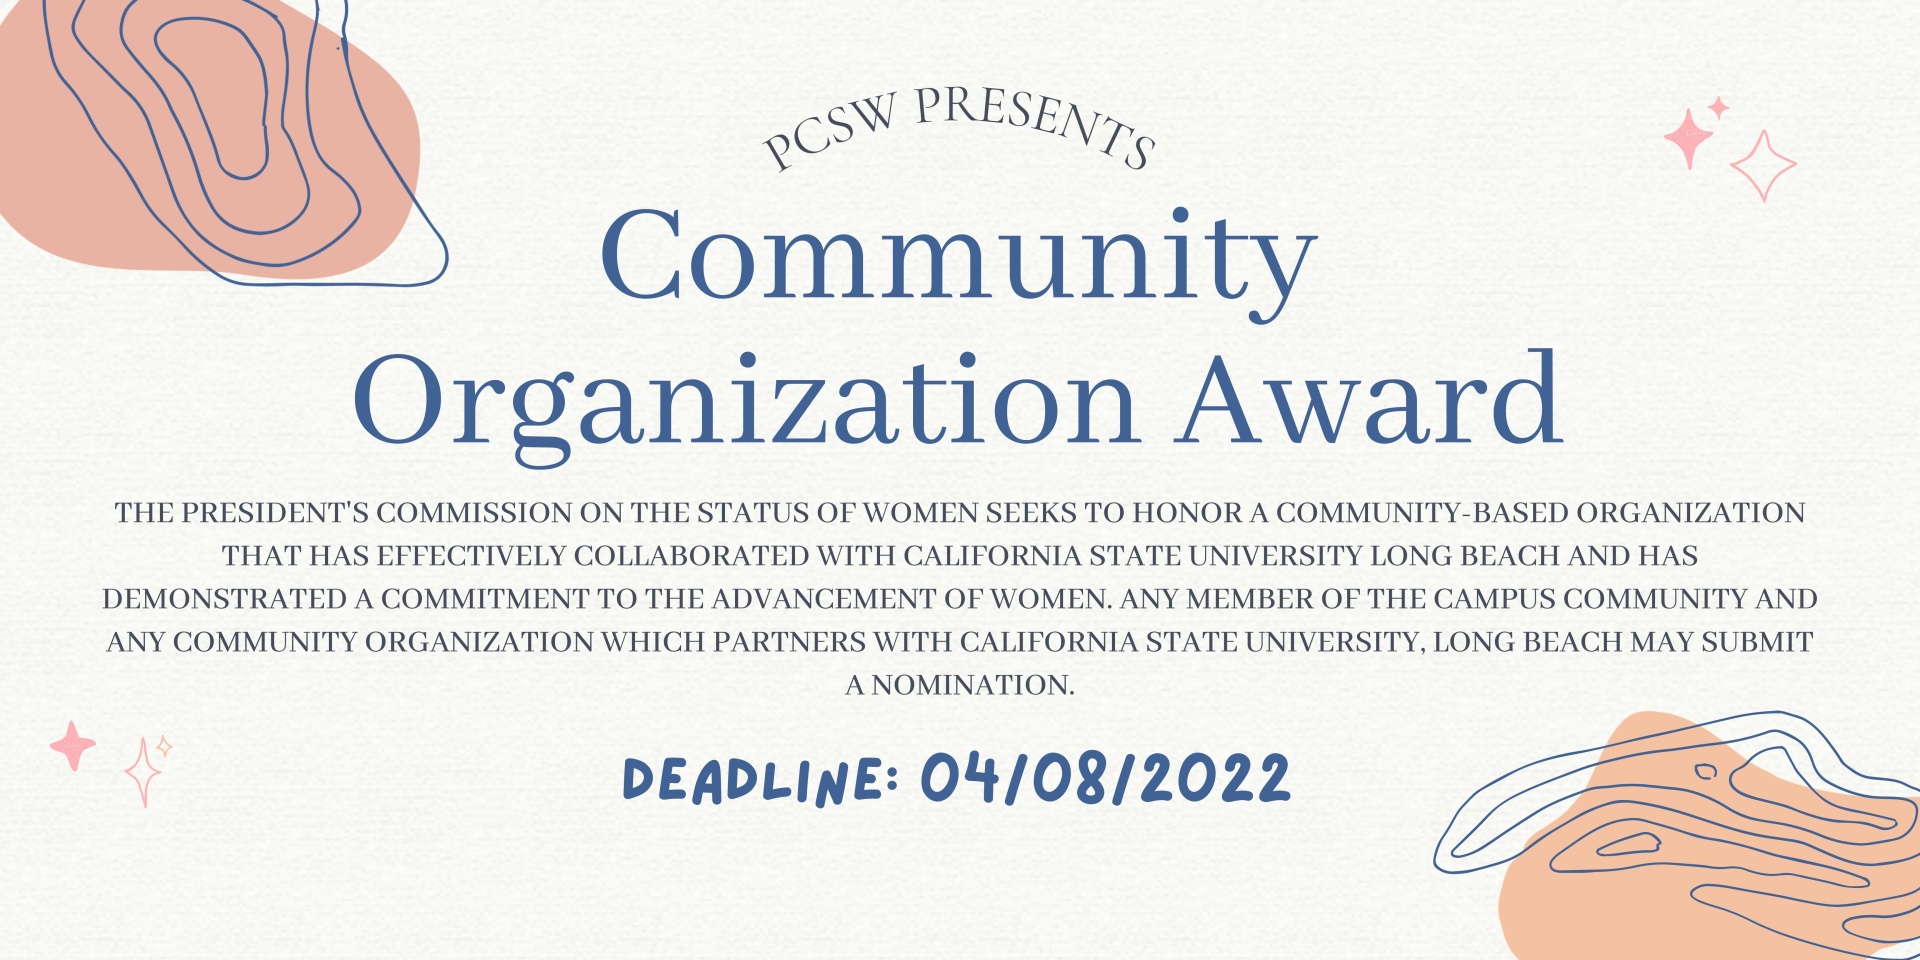 Beige Banner titled "Community Organization Award". Deadline is marked as April 8th 2022.